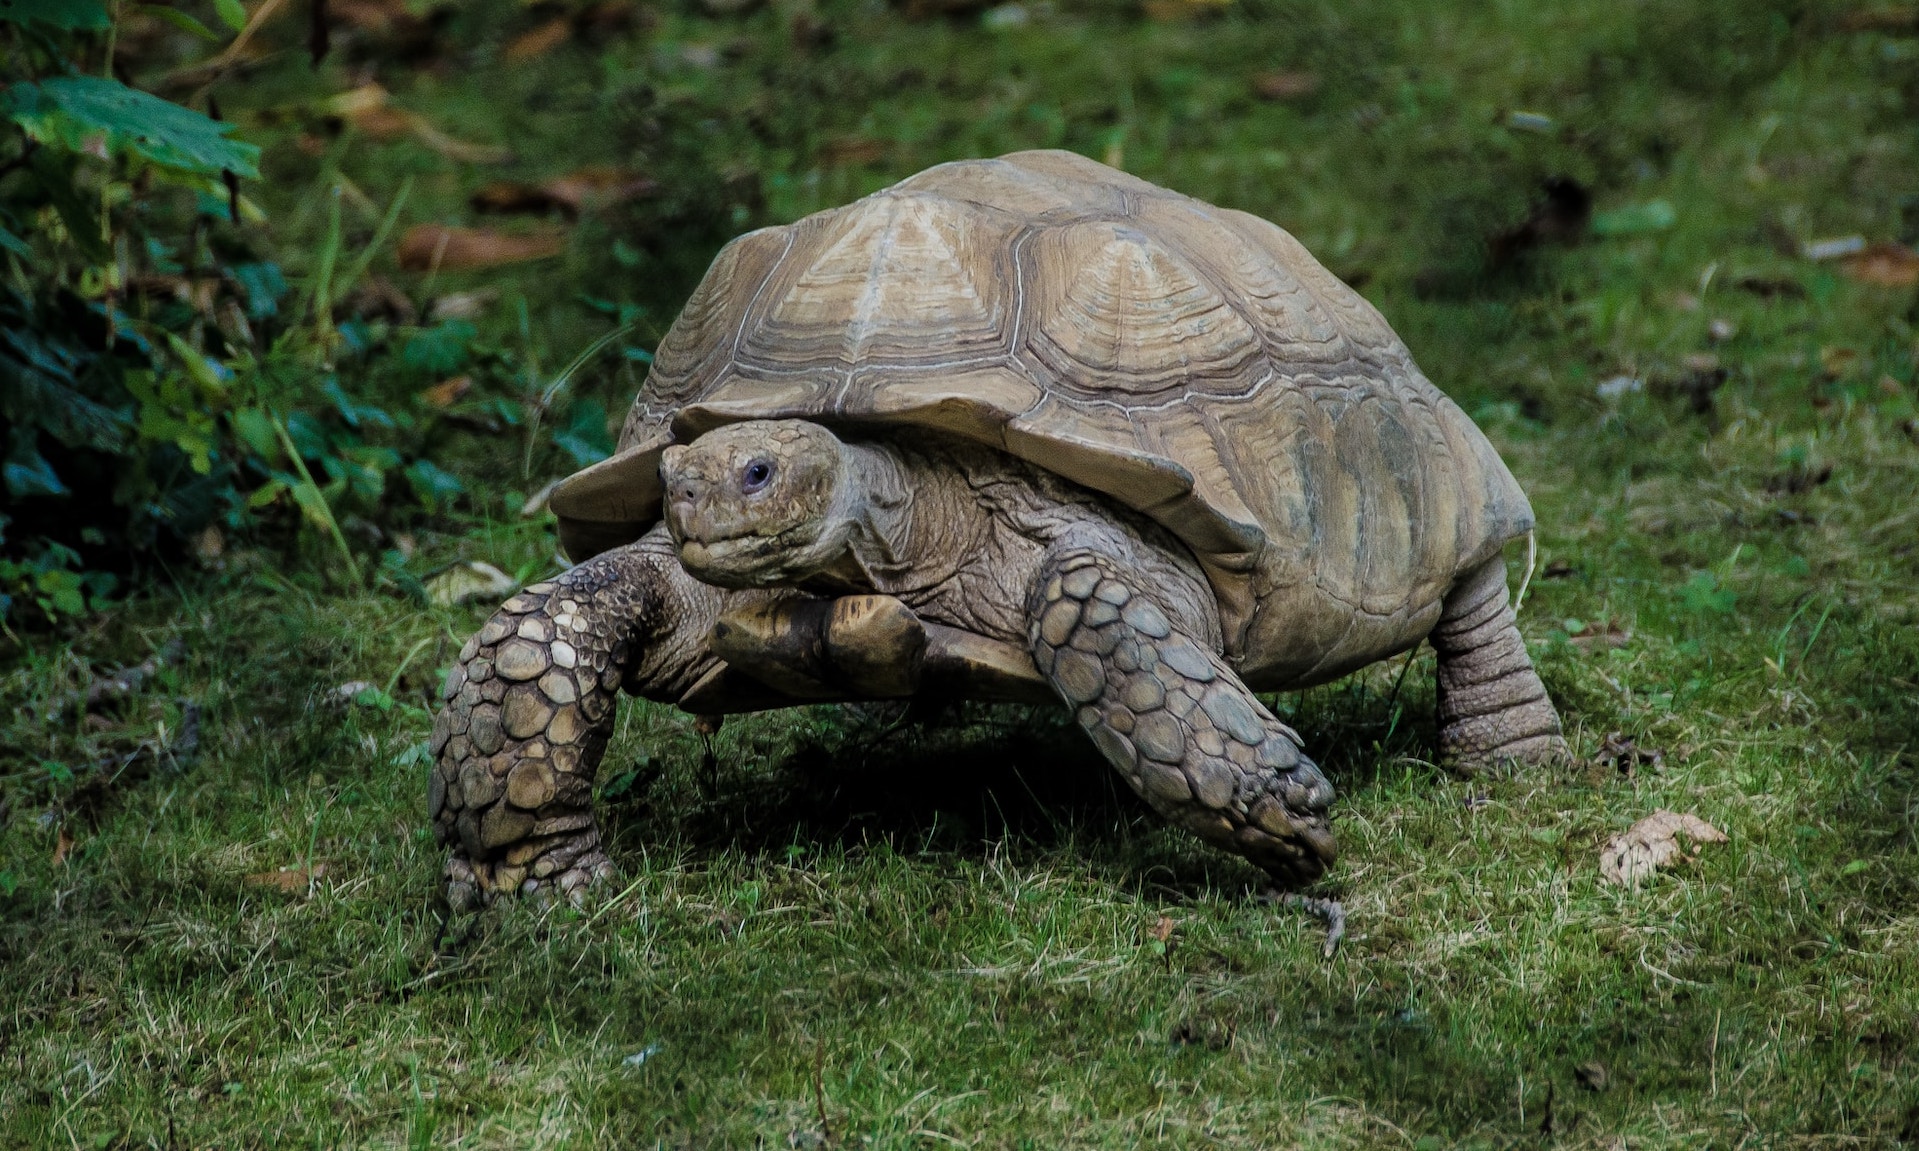 The discovery of a one-of-a-kind Galápagos Island tortoise named Fernanda hints at the genetic survival of an extinct species.